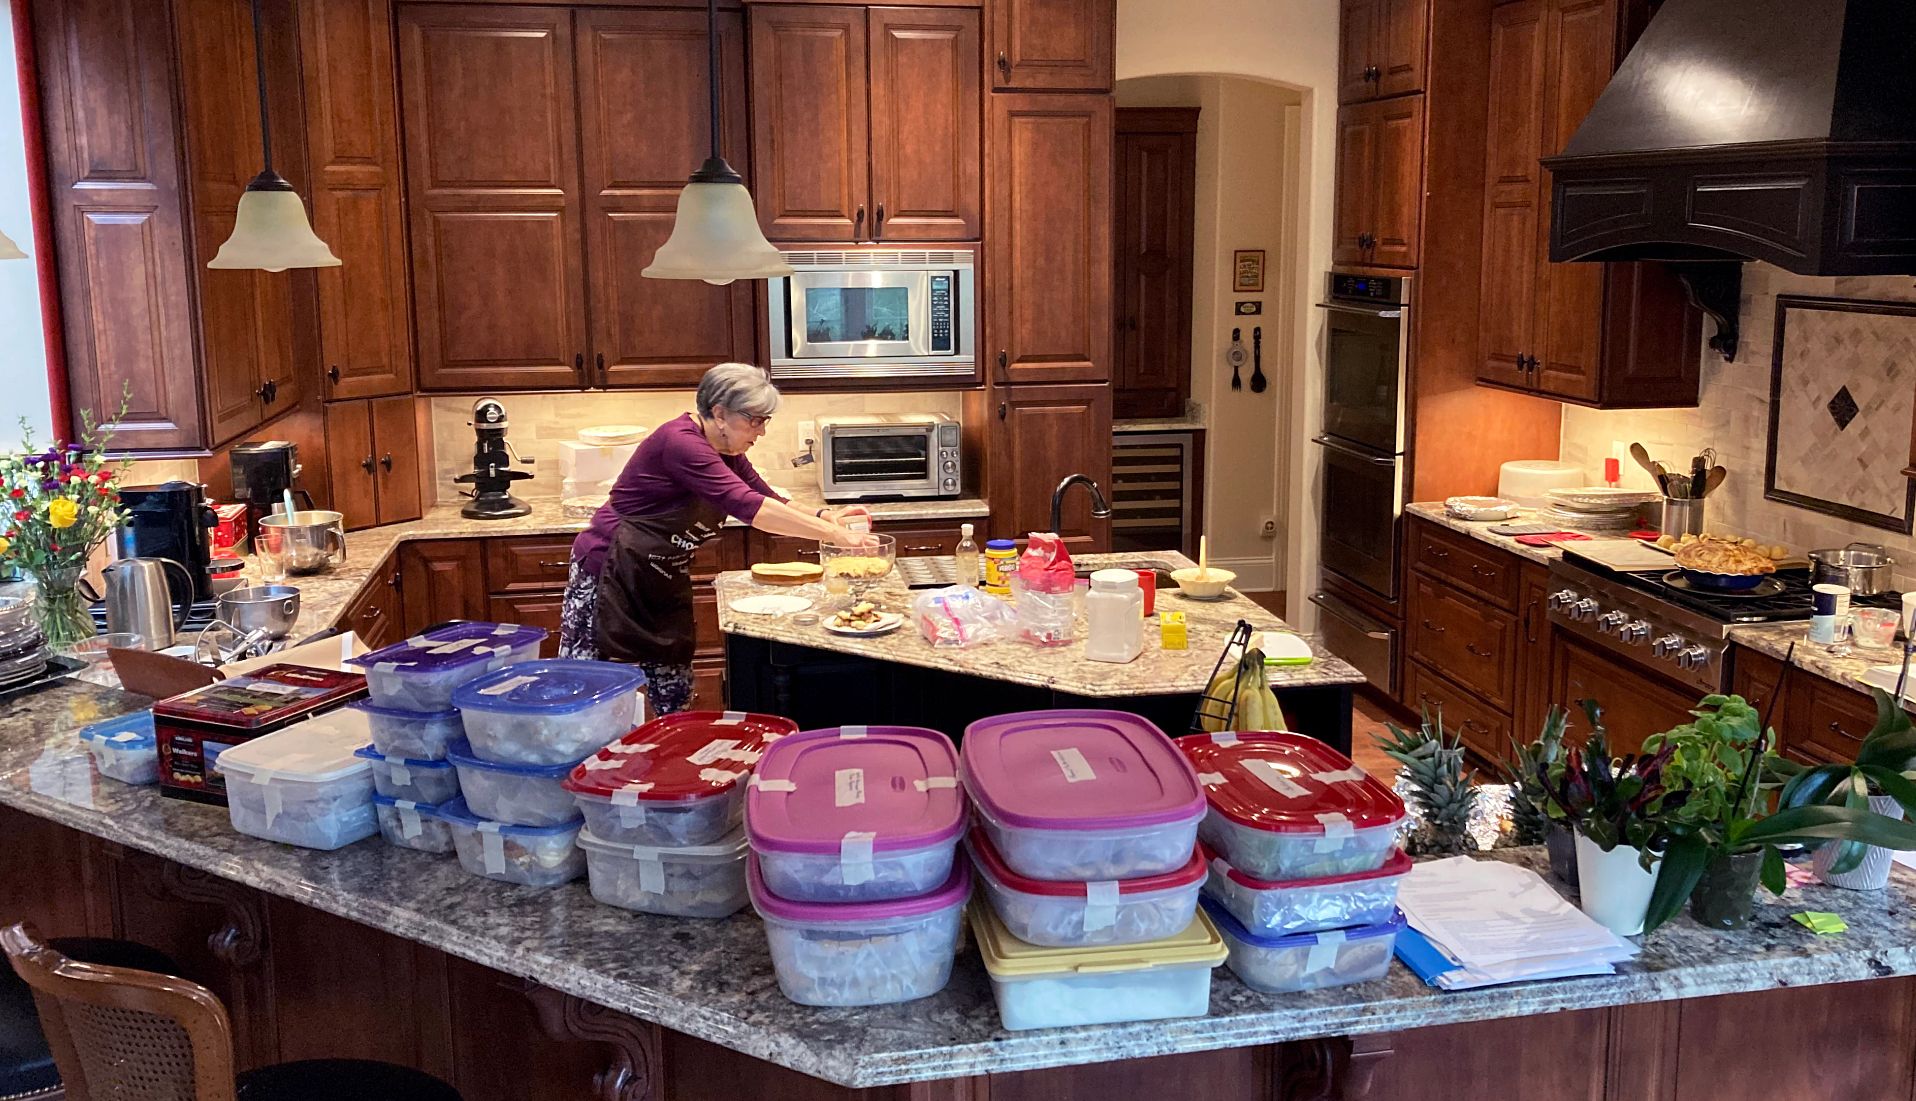 Barbara Beckerman preparing baked goods in a kitchen with various dishes in tupperware on the counter